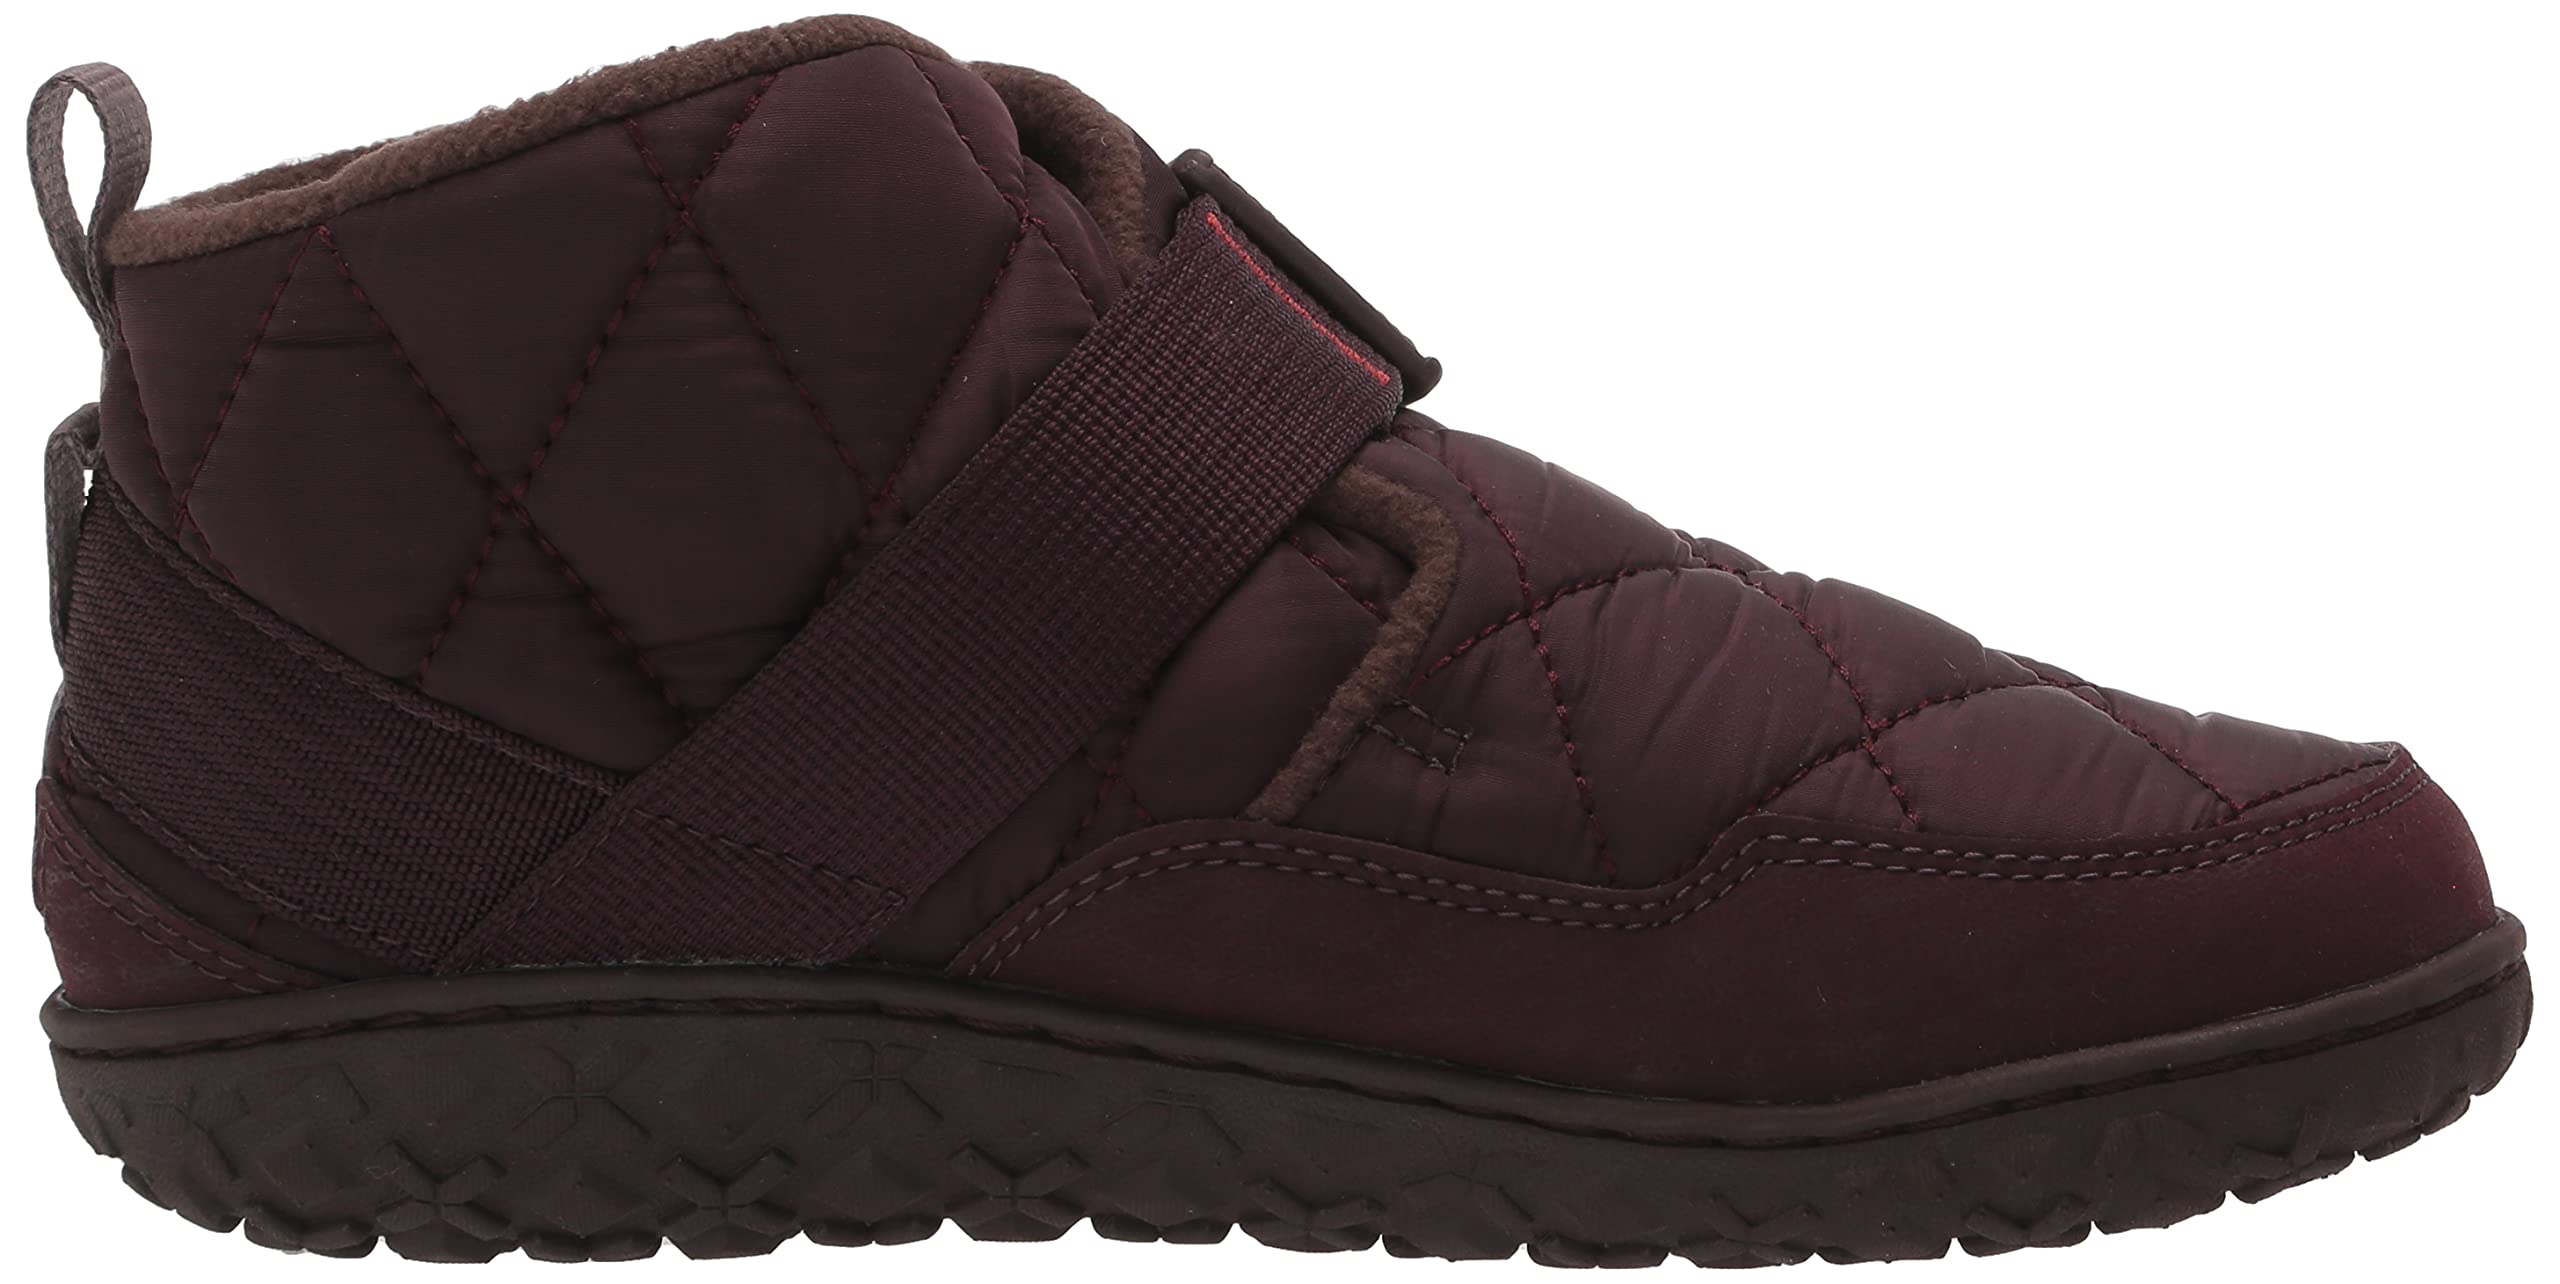 Chaco Women's Ramble Puff Ankle Boot